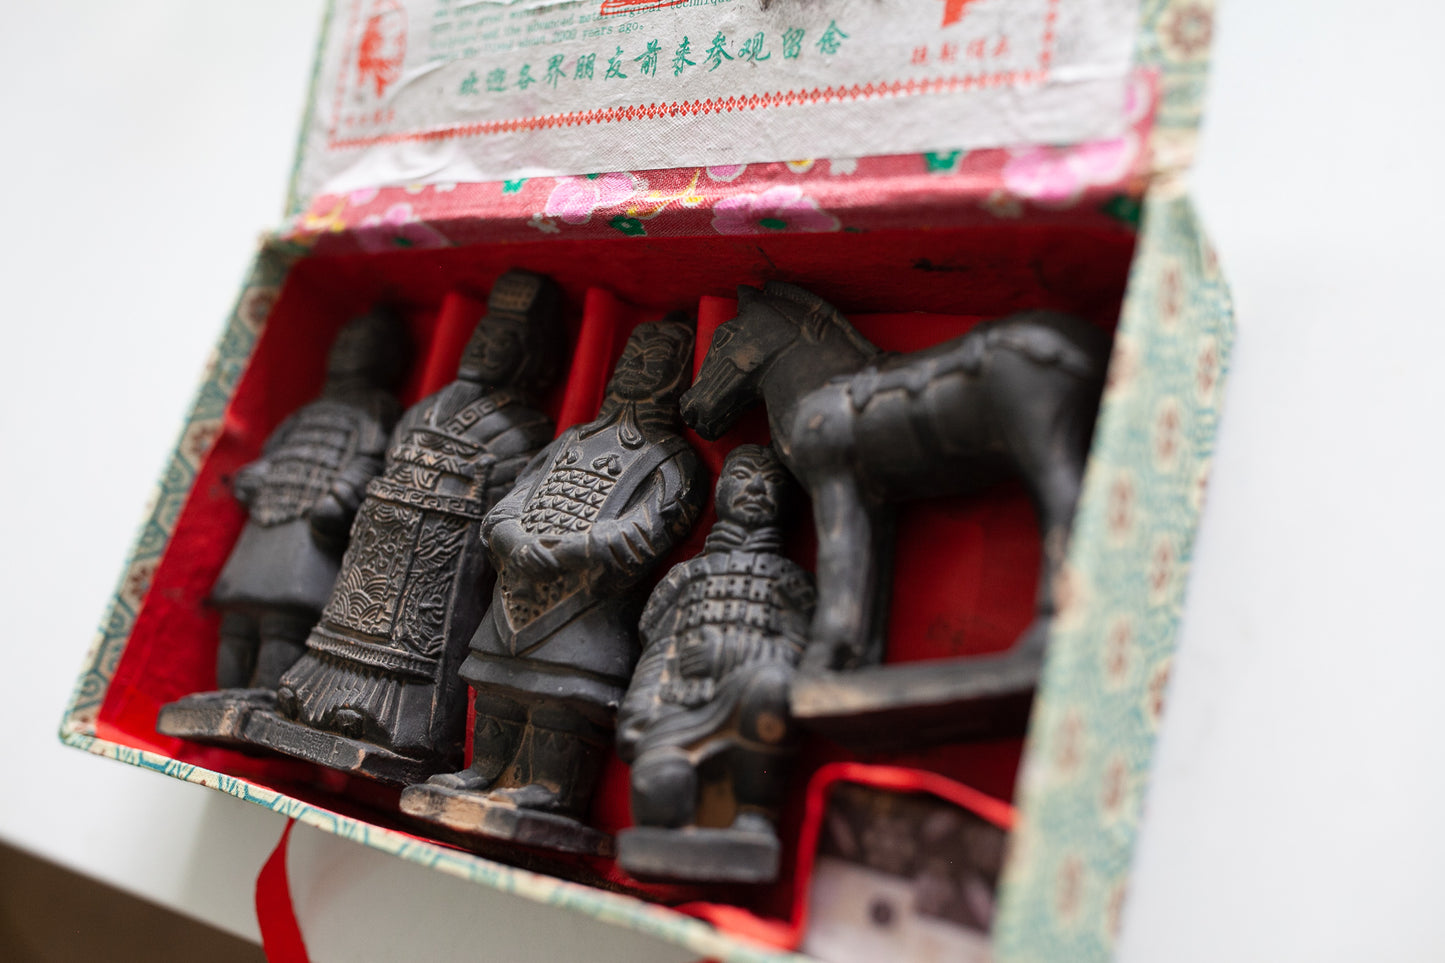 Vintage, boxed, five terracotta, chinese figurines of warriors and a horse, set tomb of Emperor Shi Qin Dynasty, terracotta army